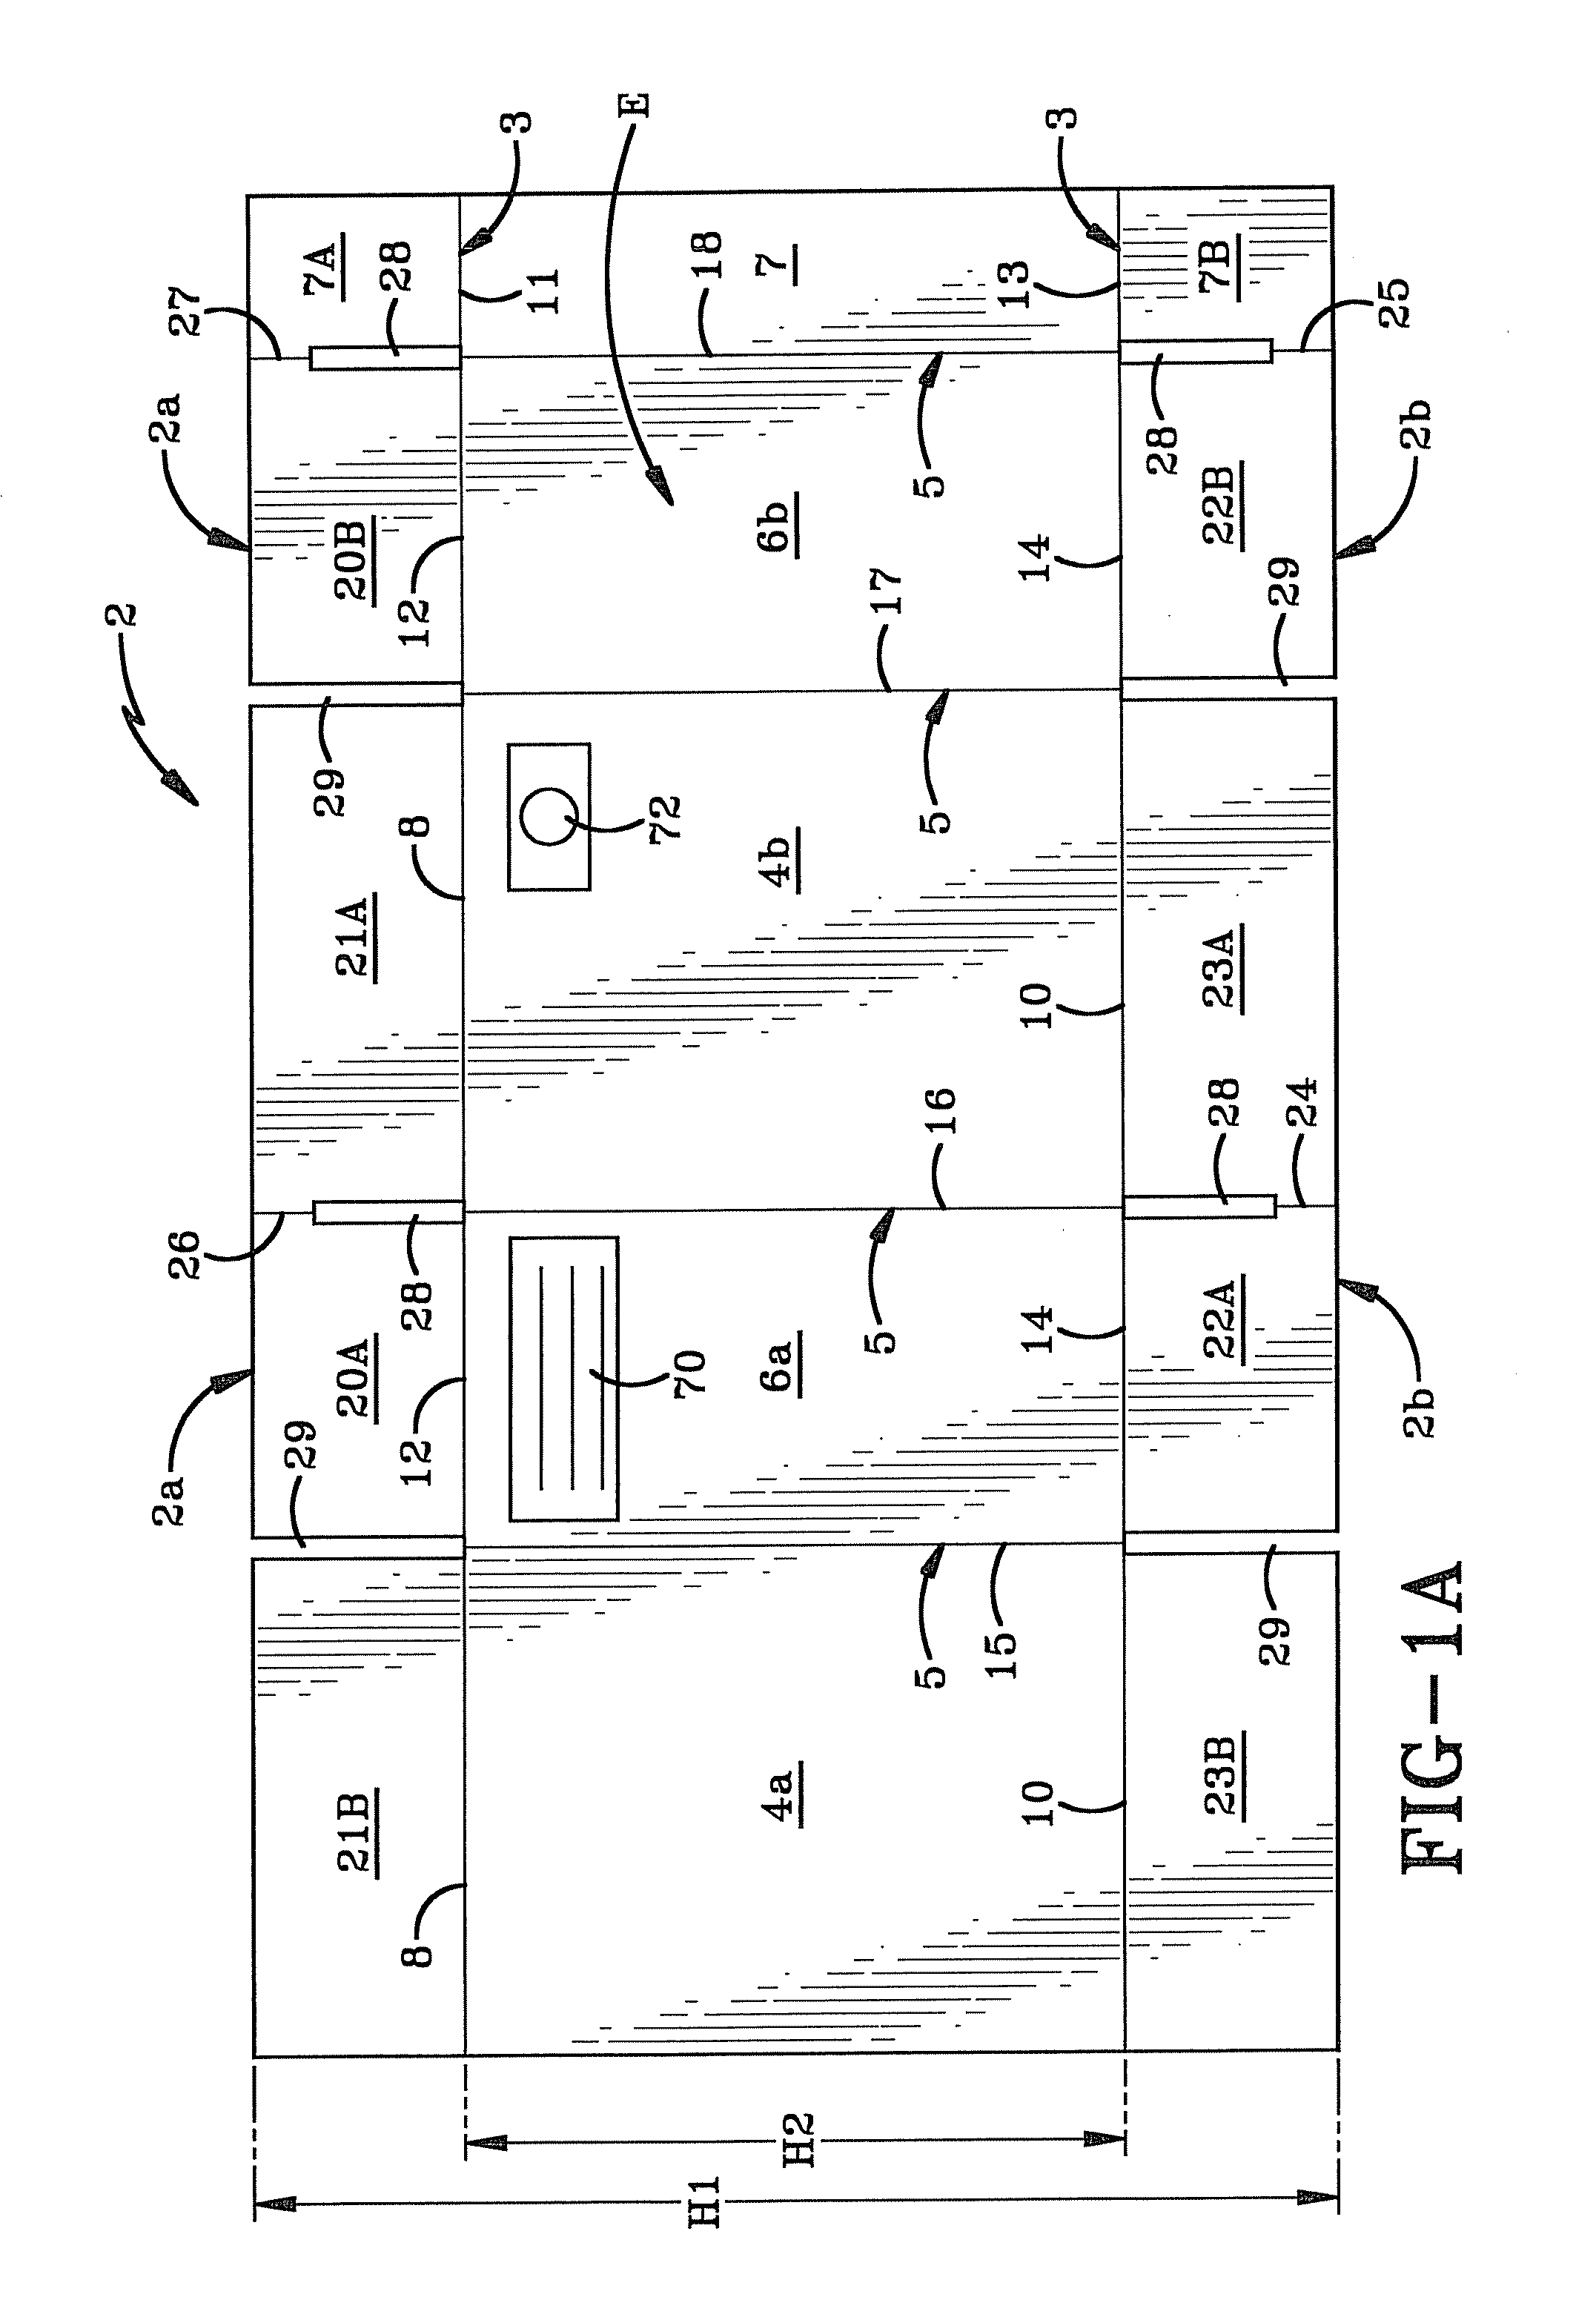 Method and apparatus for making, shipping and erecting boxes